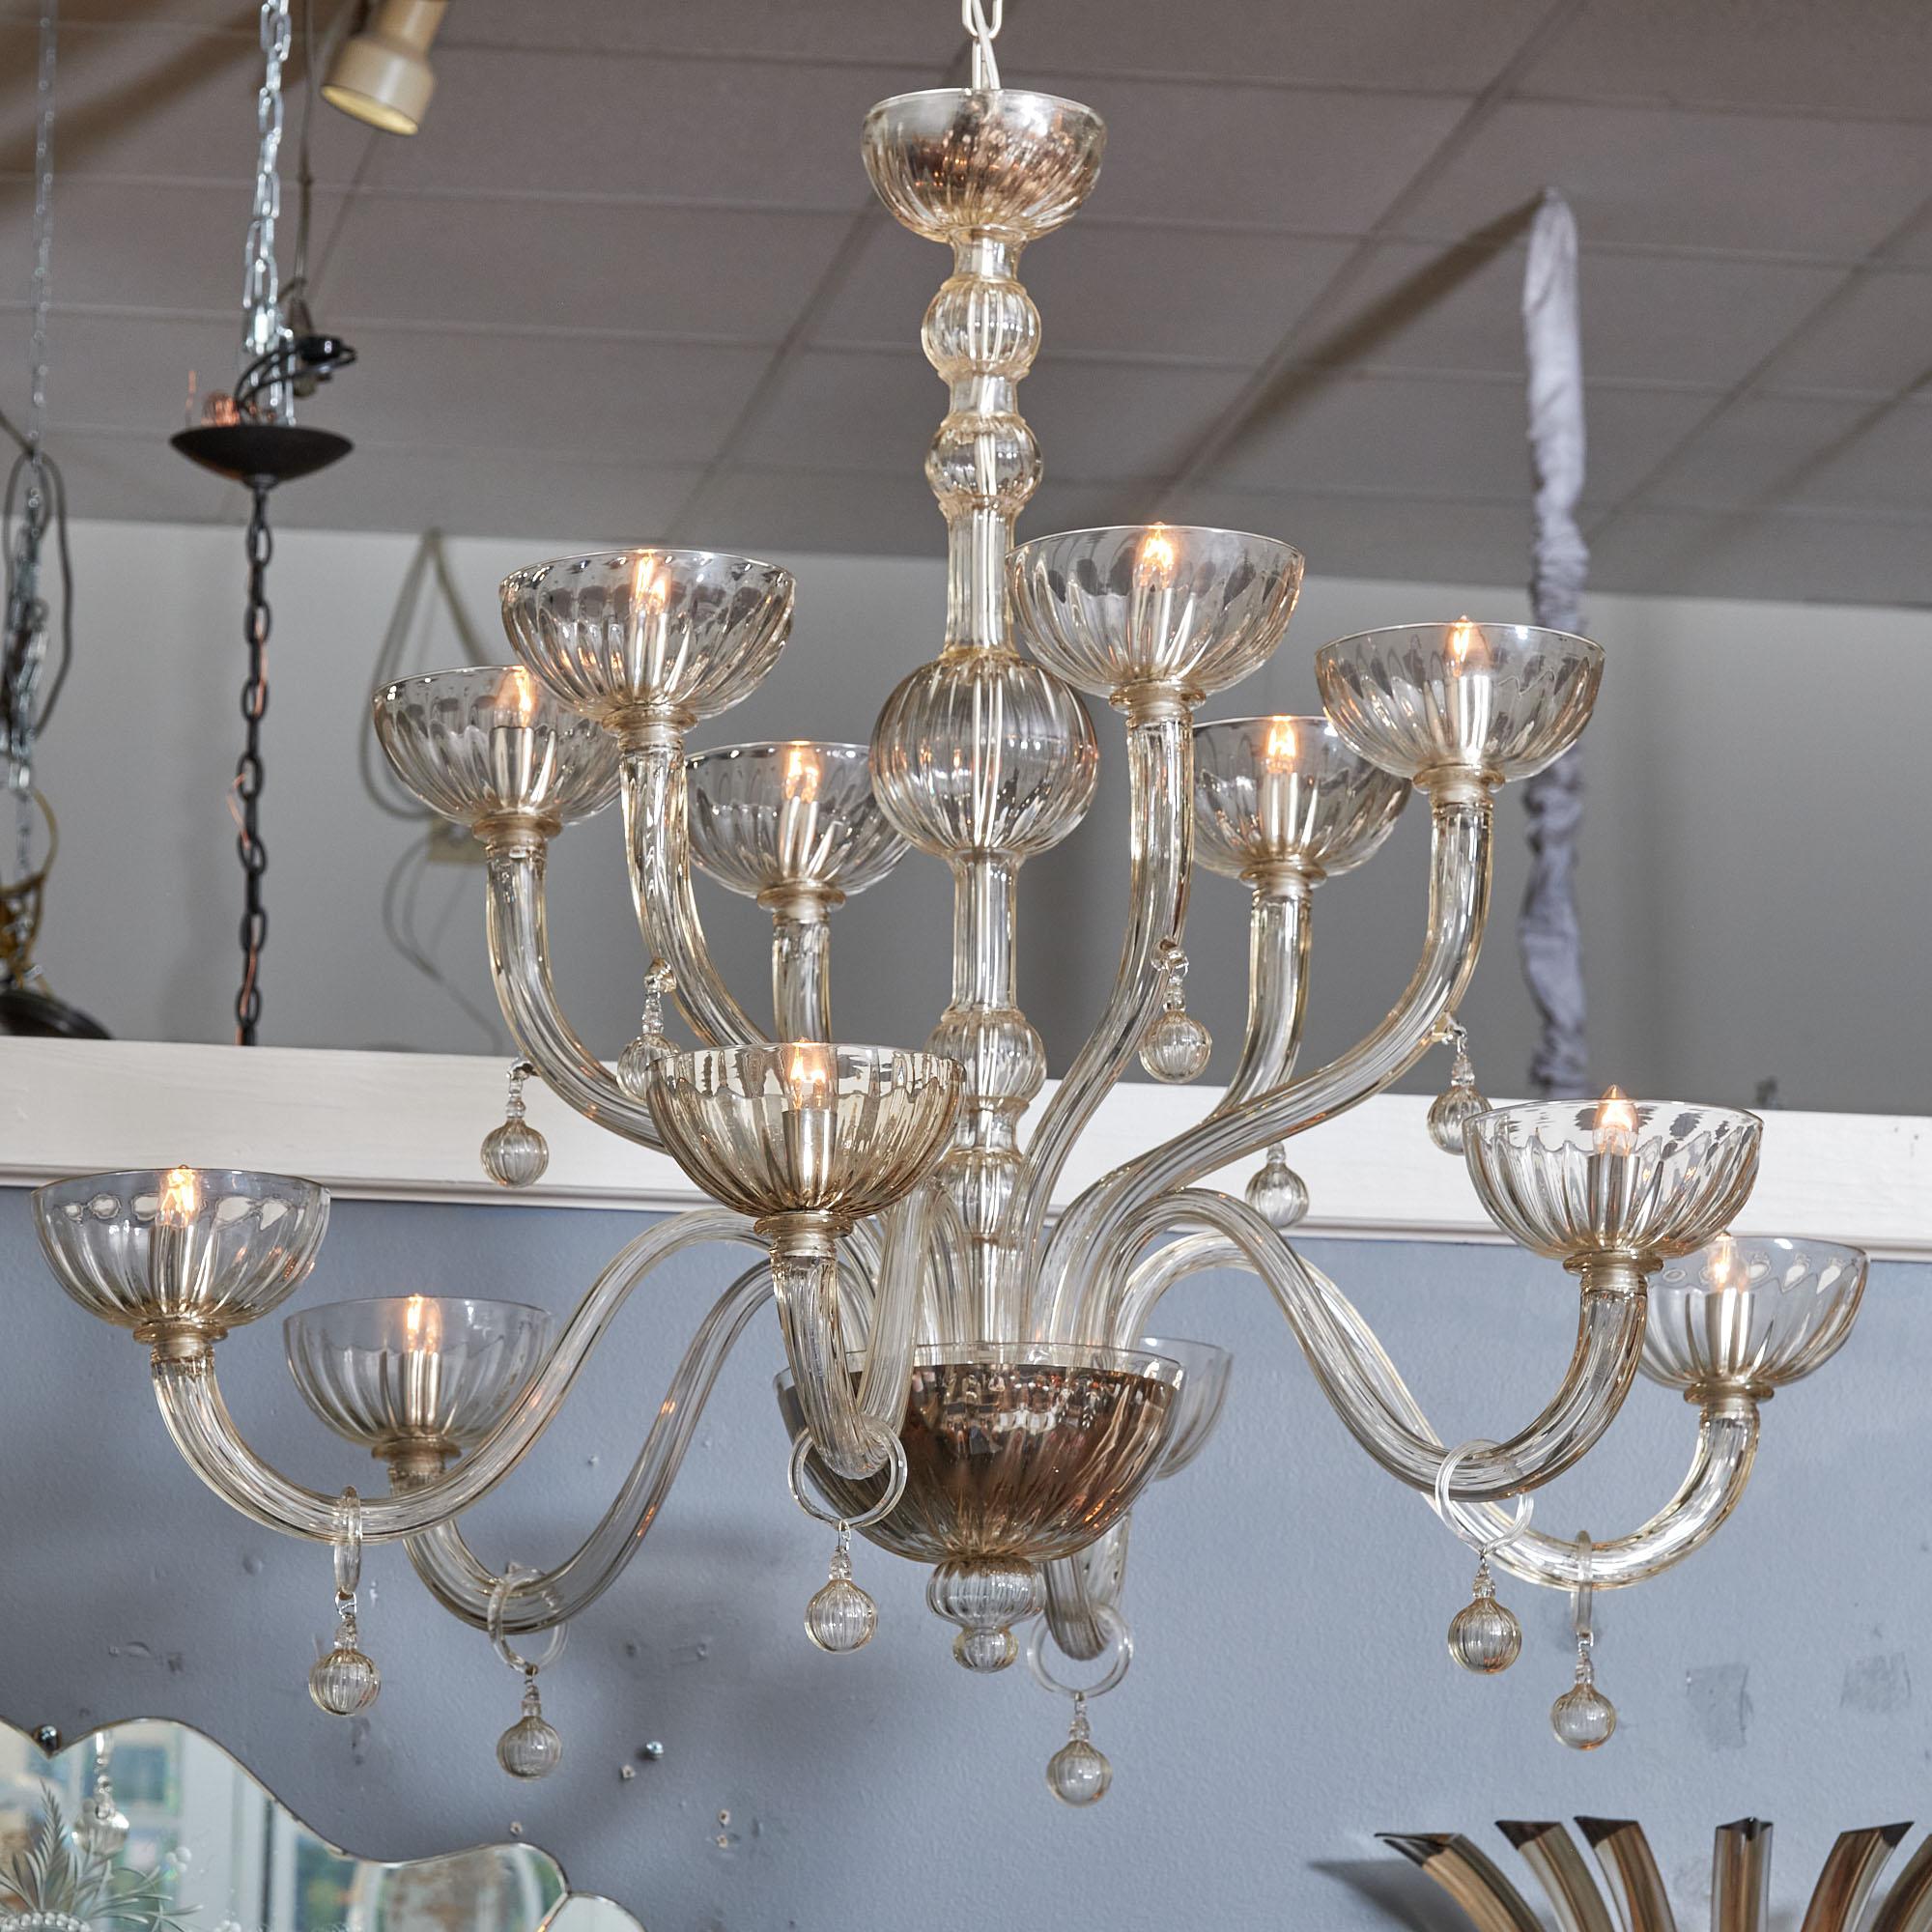 Italian Murano “Cristallo Antico” glass chandelier by Seguso. Beautiful hand blown Murano glass chandelier in a slightly smoked crystal color named “antico